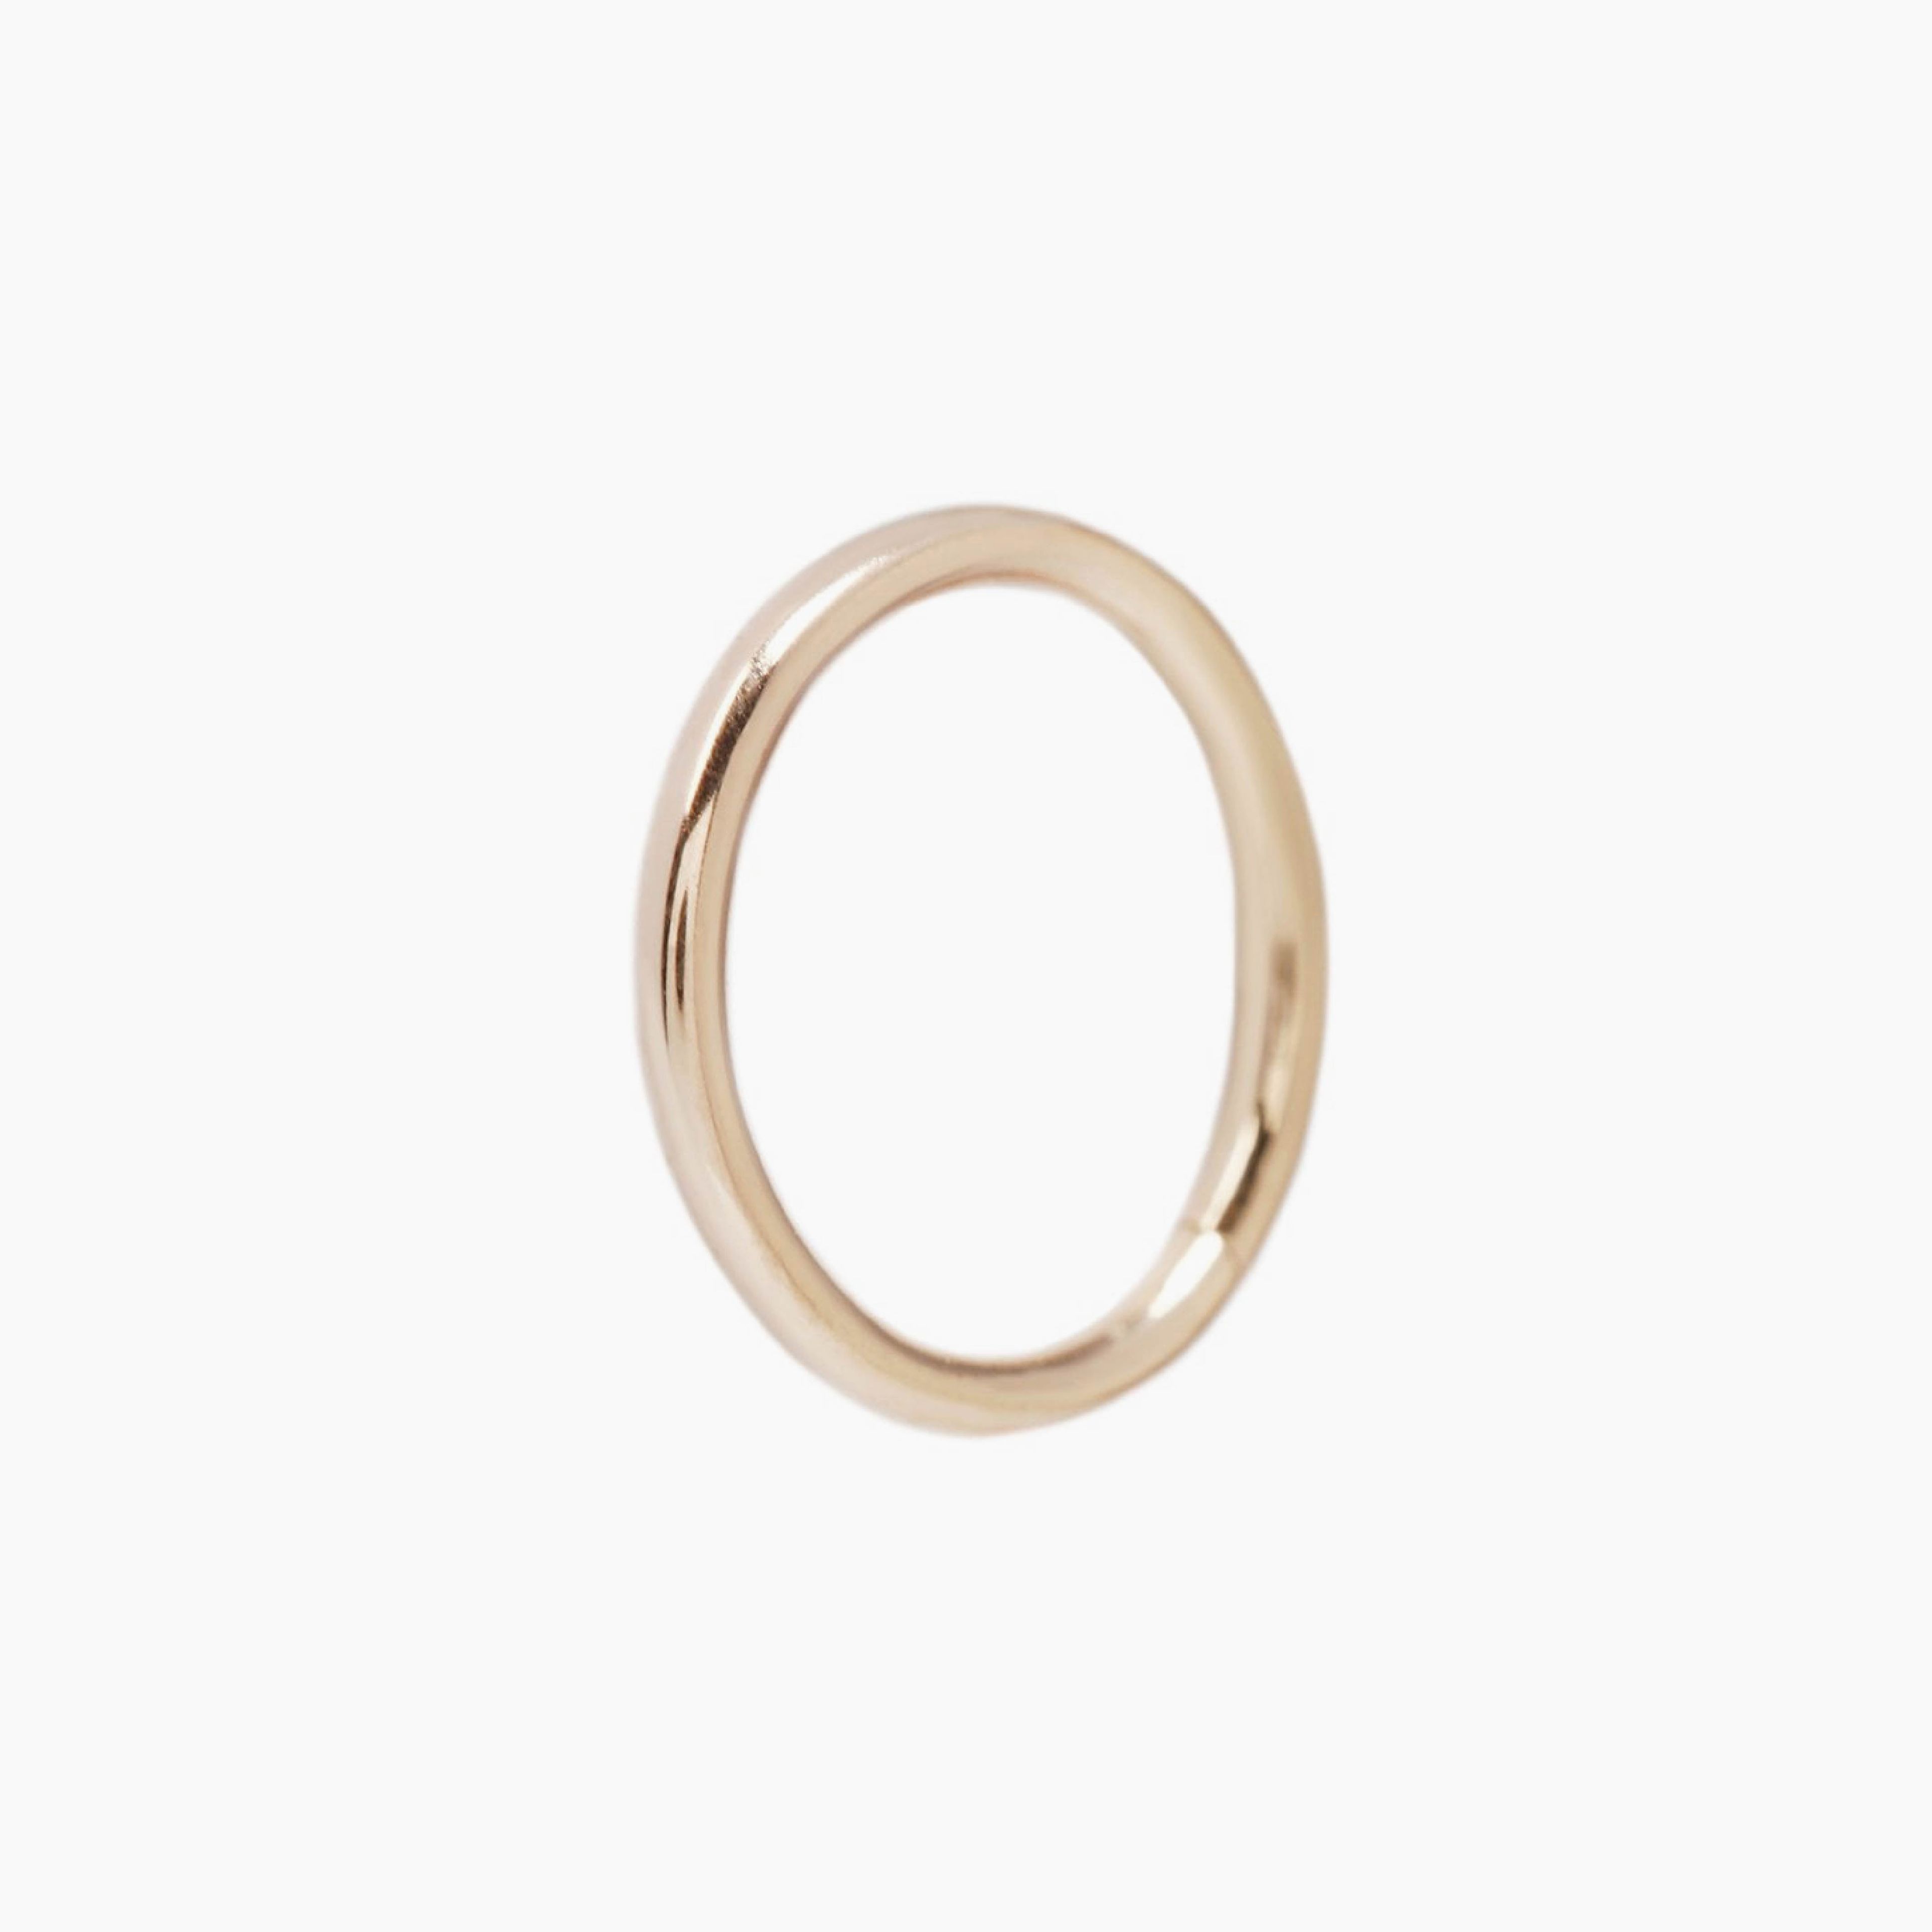 Solid Gold Seam Ring